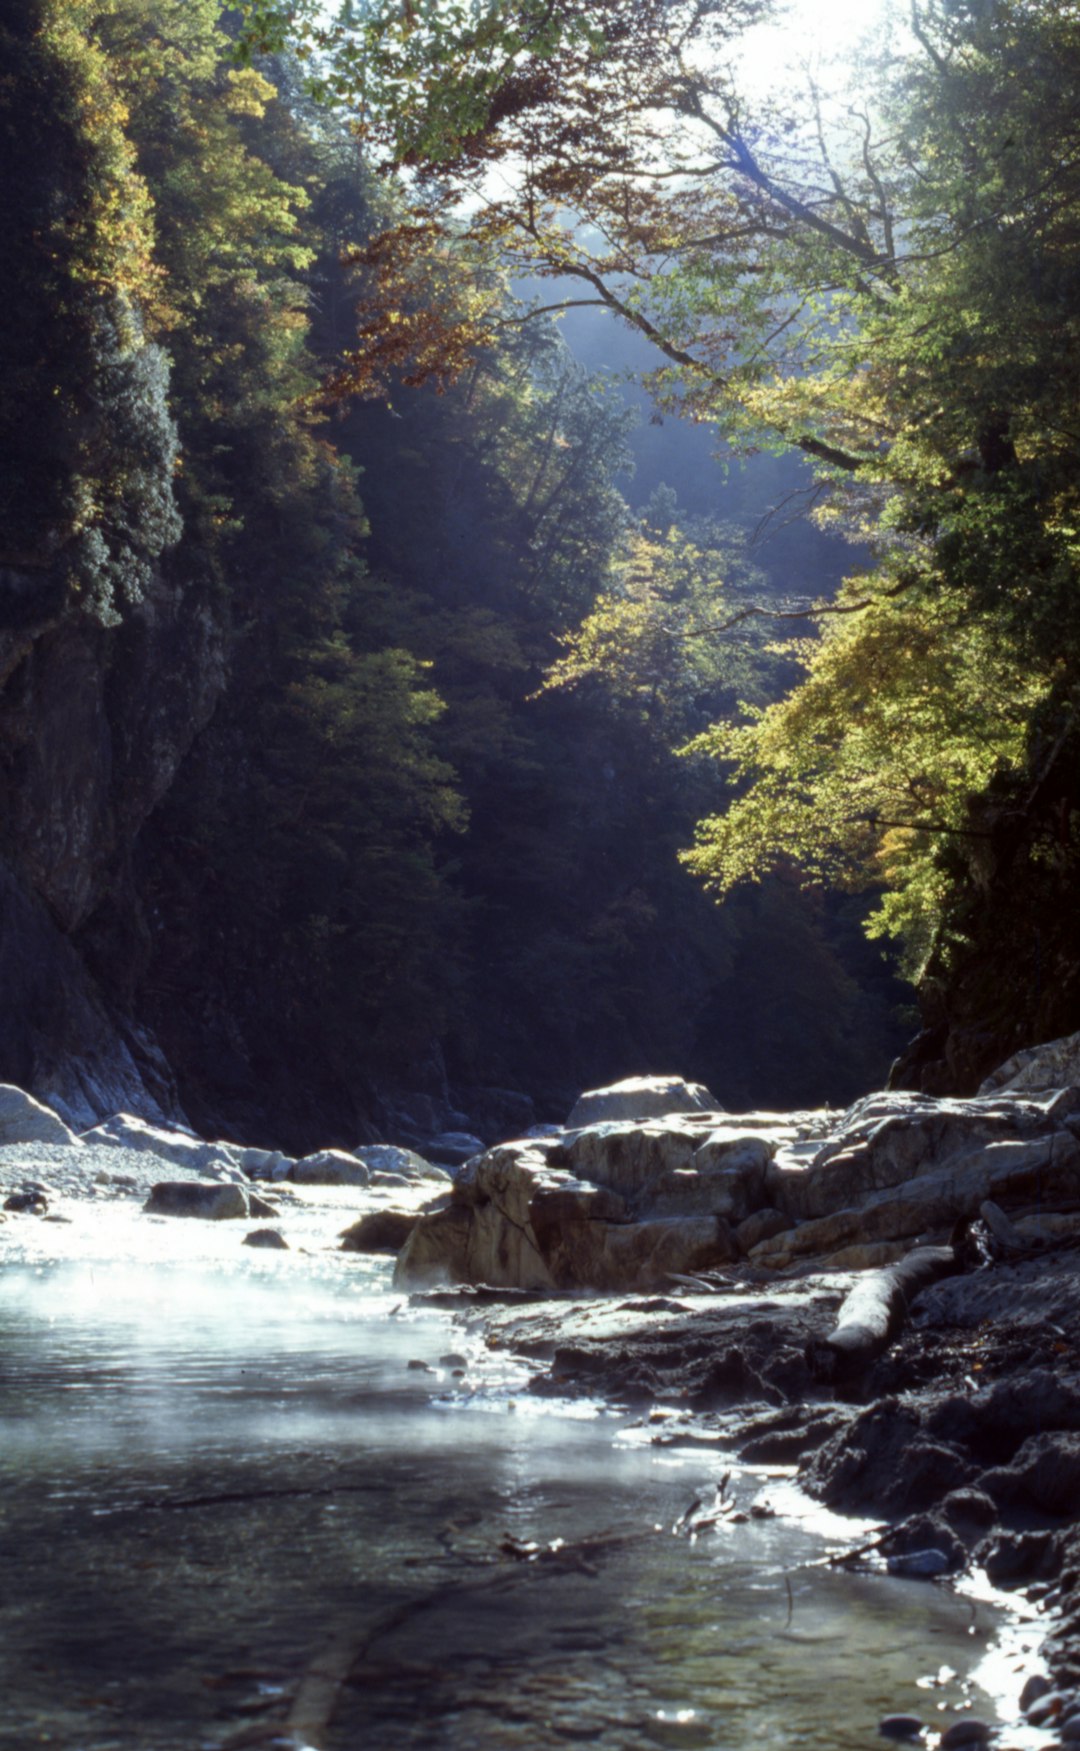 travelers stories about Stream in Kurobe River, Japan